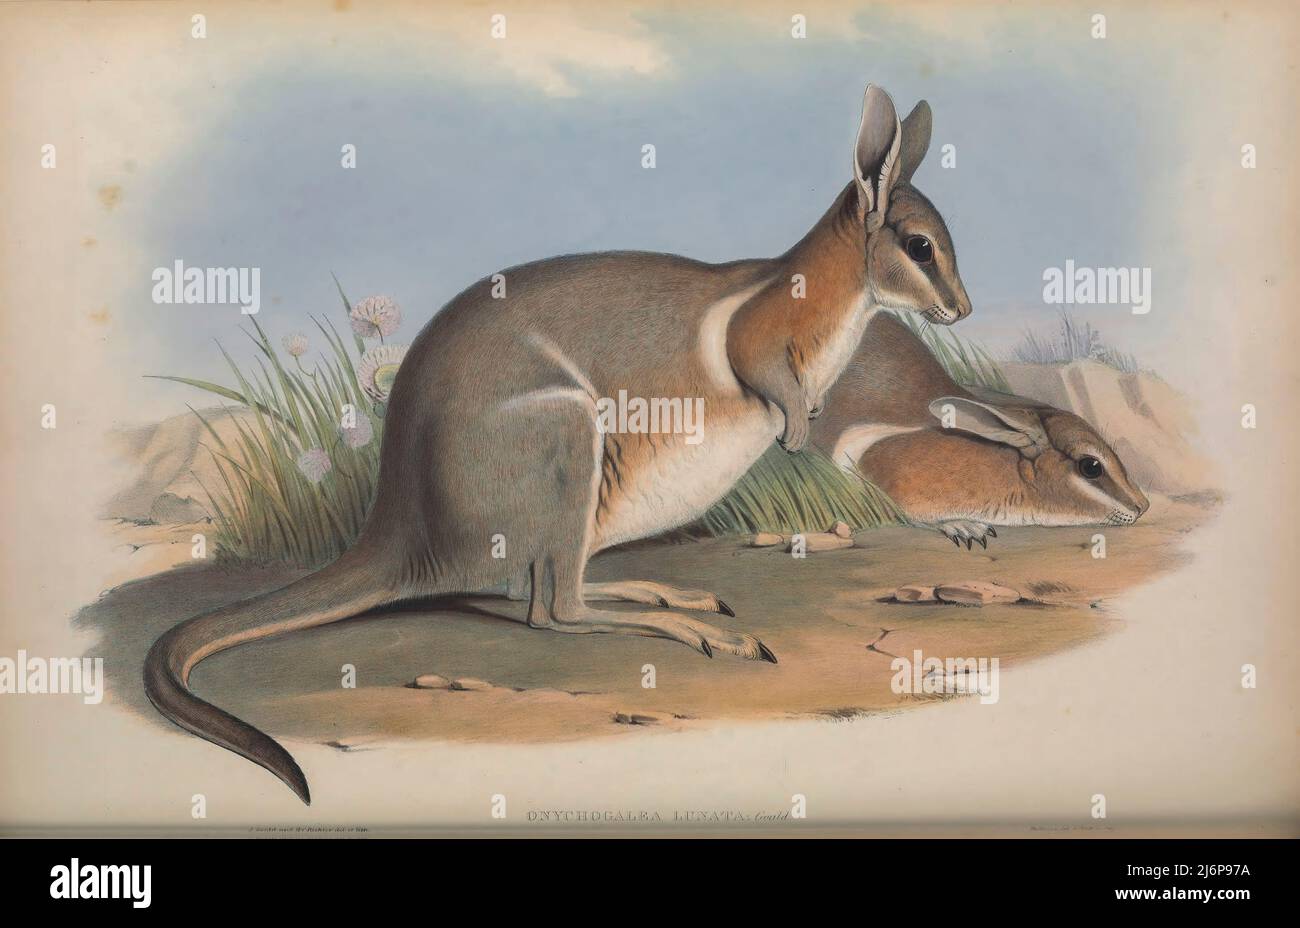 EXTINCT The crescent nail-tail wallaby, also known as the worong (Onychogalea lunata), was a small species of marsupial that grazed on grasses in the scrub and woodlands of southwestern and central Australia. They were common in Western Australia before they disappeared in the early 20th century and persisted in the central deserts until at least the 1950s. The pelage was soft and silky and an ashen grey colouring overall, highlighted in part with rufous tones. There were light and dark patches of fur across the body, the moon-like crescents inspiring their names, and had attractive stripes on Stock Photo